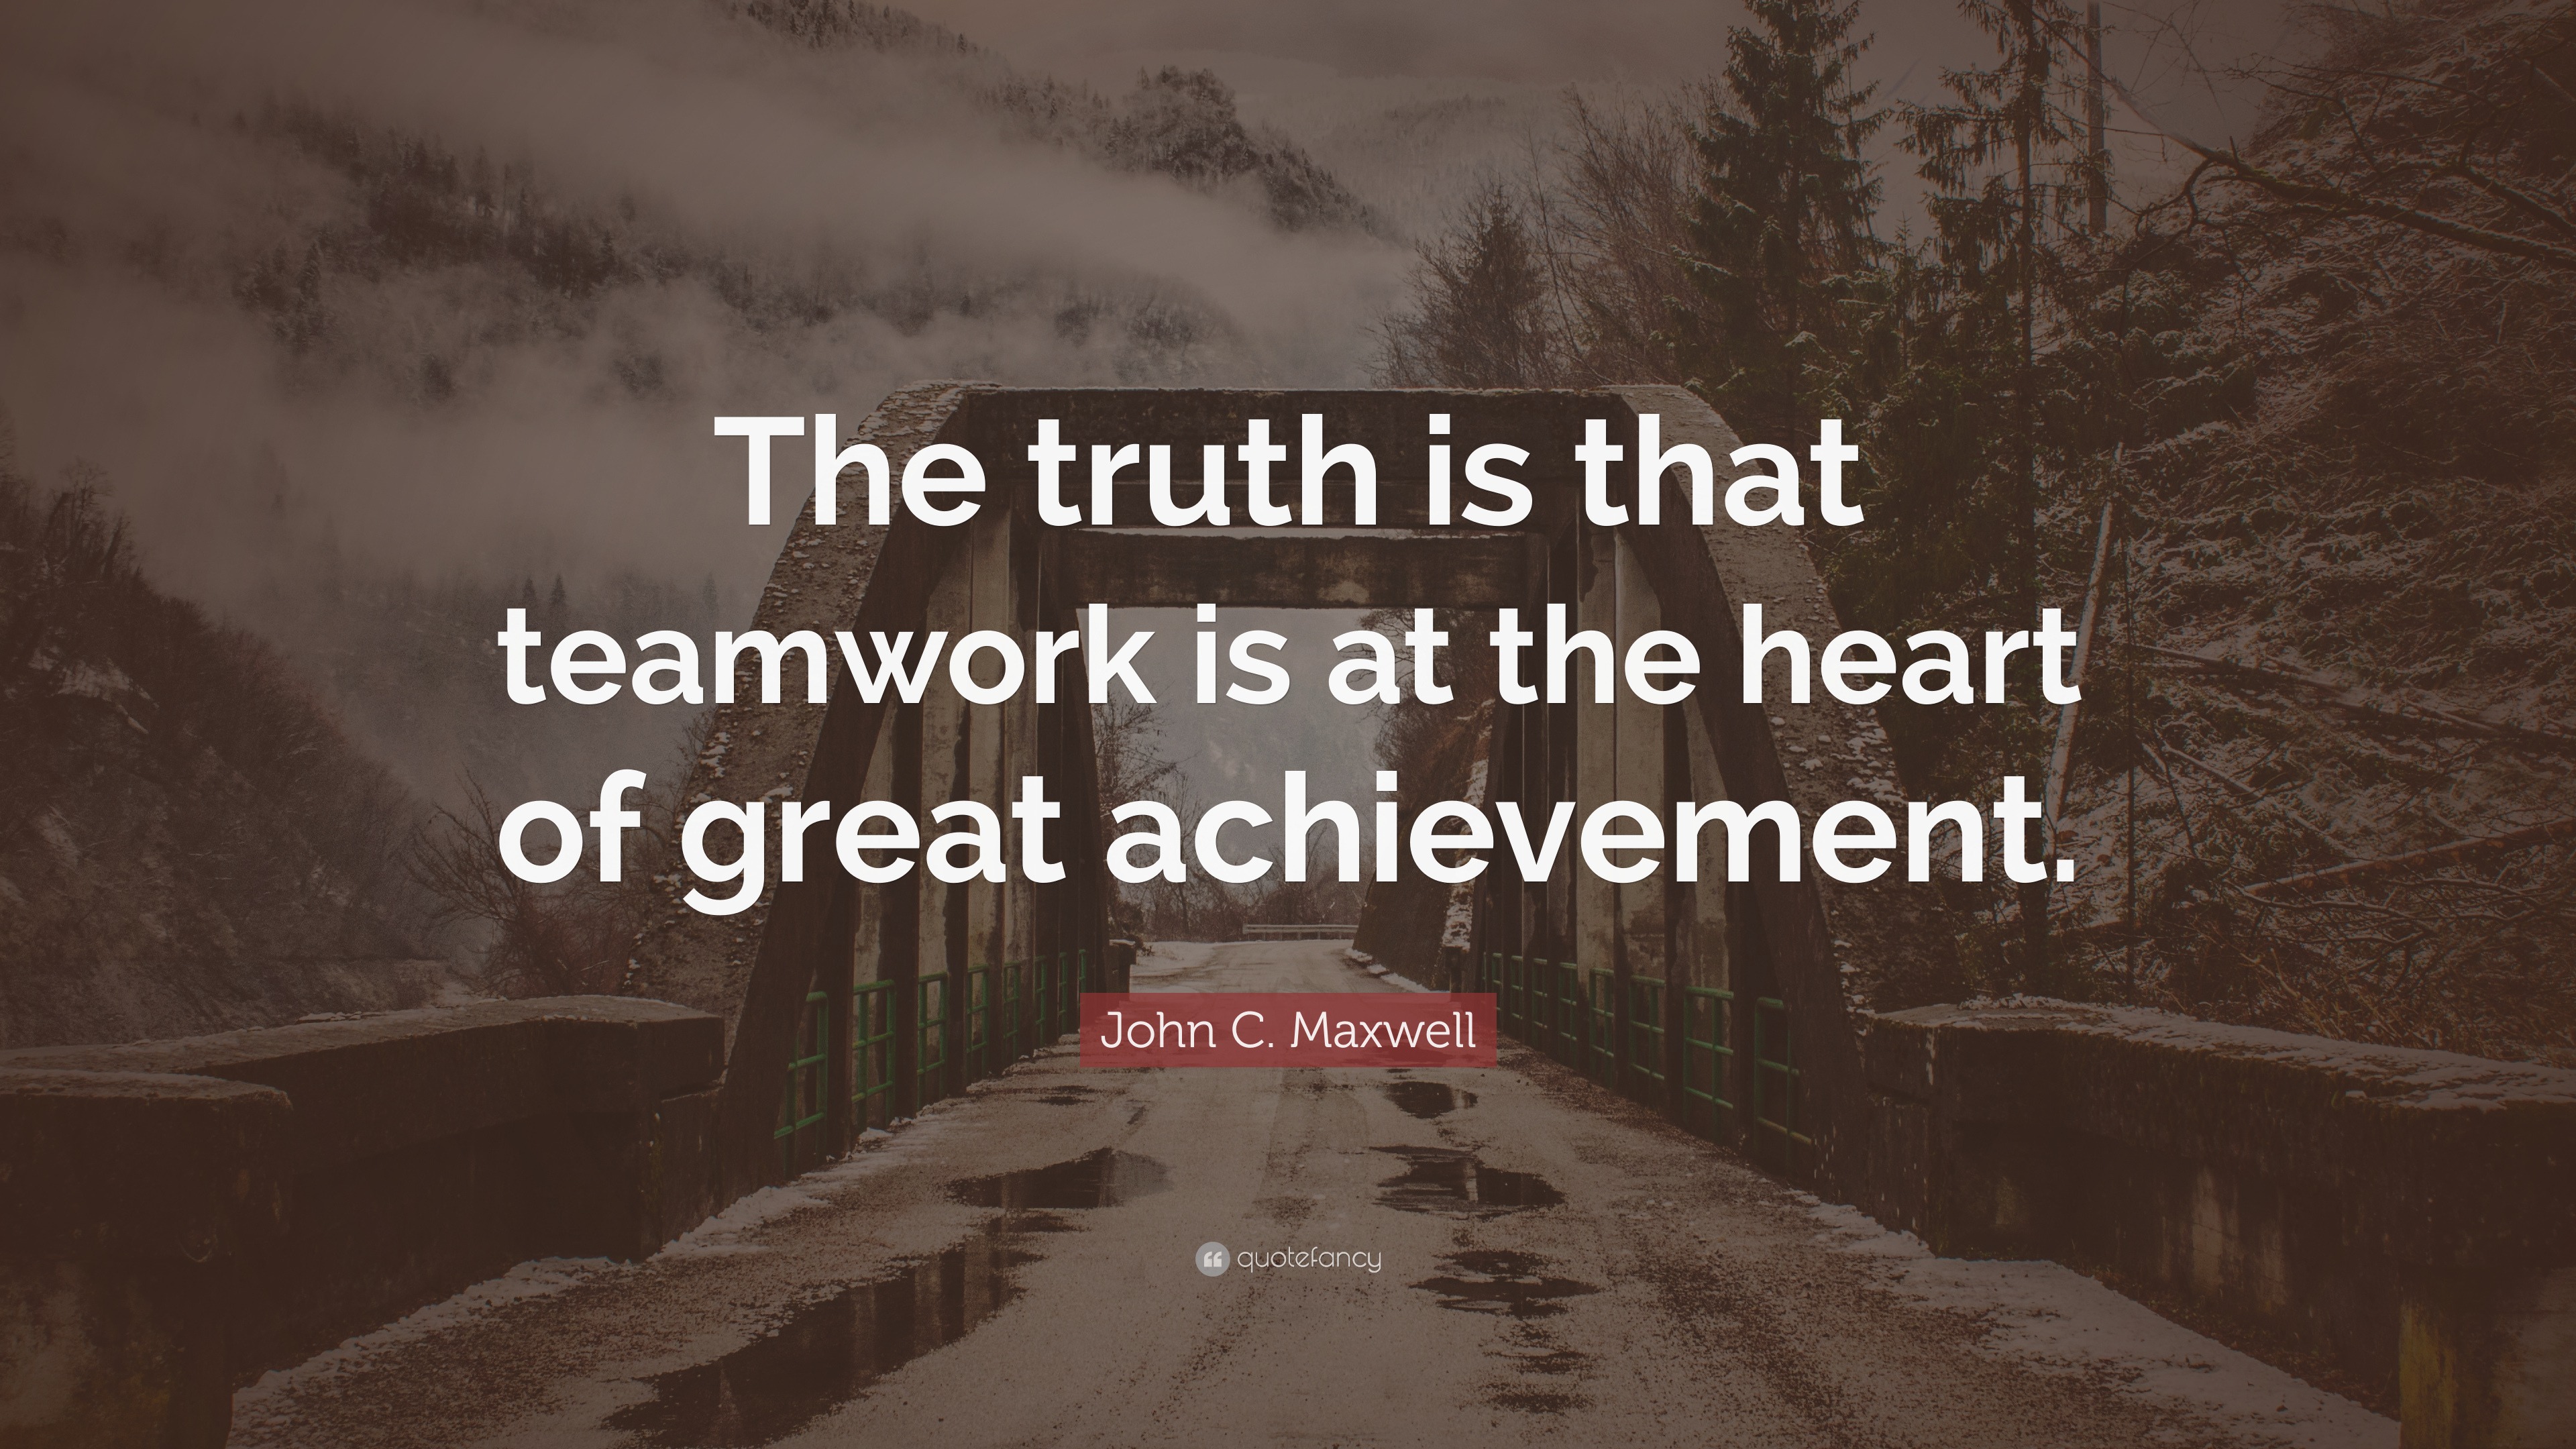 John C. Maxwell Quote: “The truth is that teamwork is at the heart of